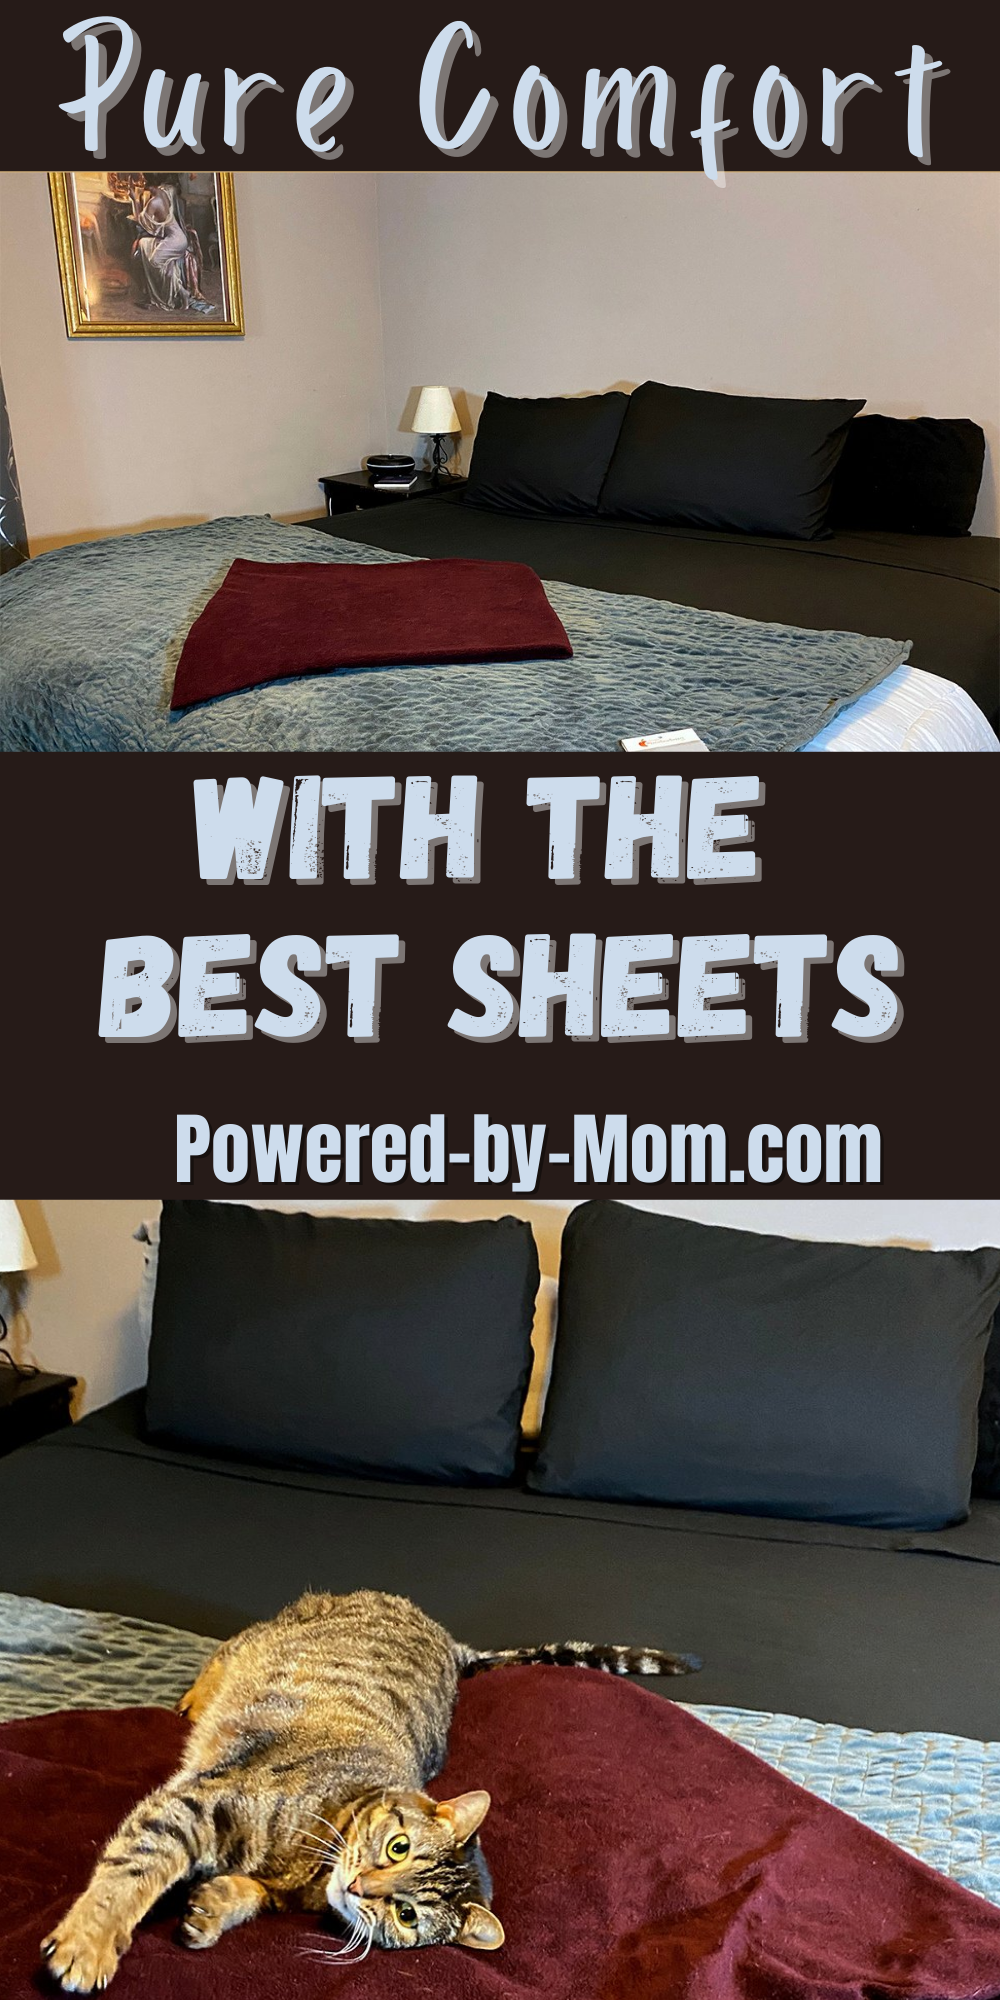 PeachSkinSheets are lightweight, breathable, and wrinkle-free. Plus, they are so soft you sleep in pure comfort. 